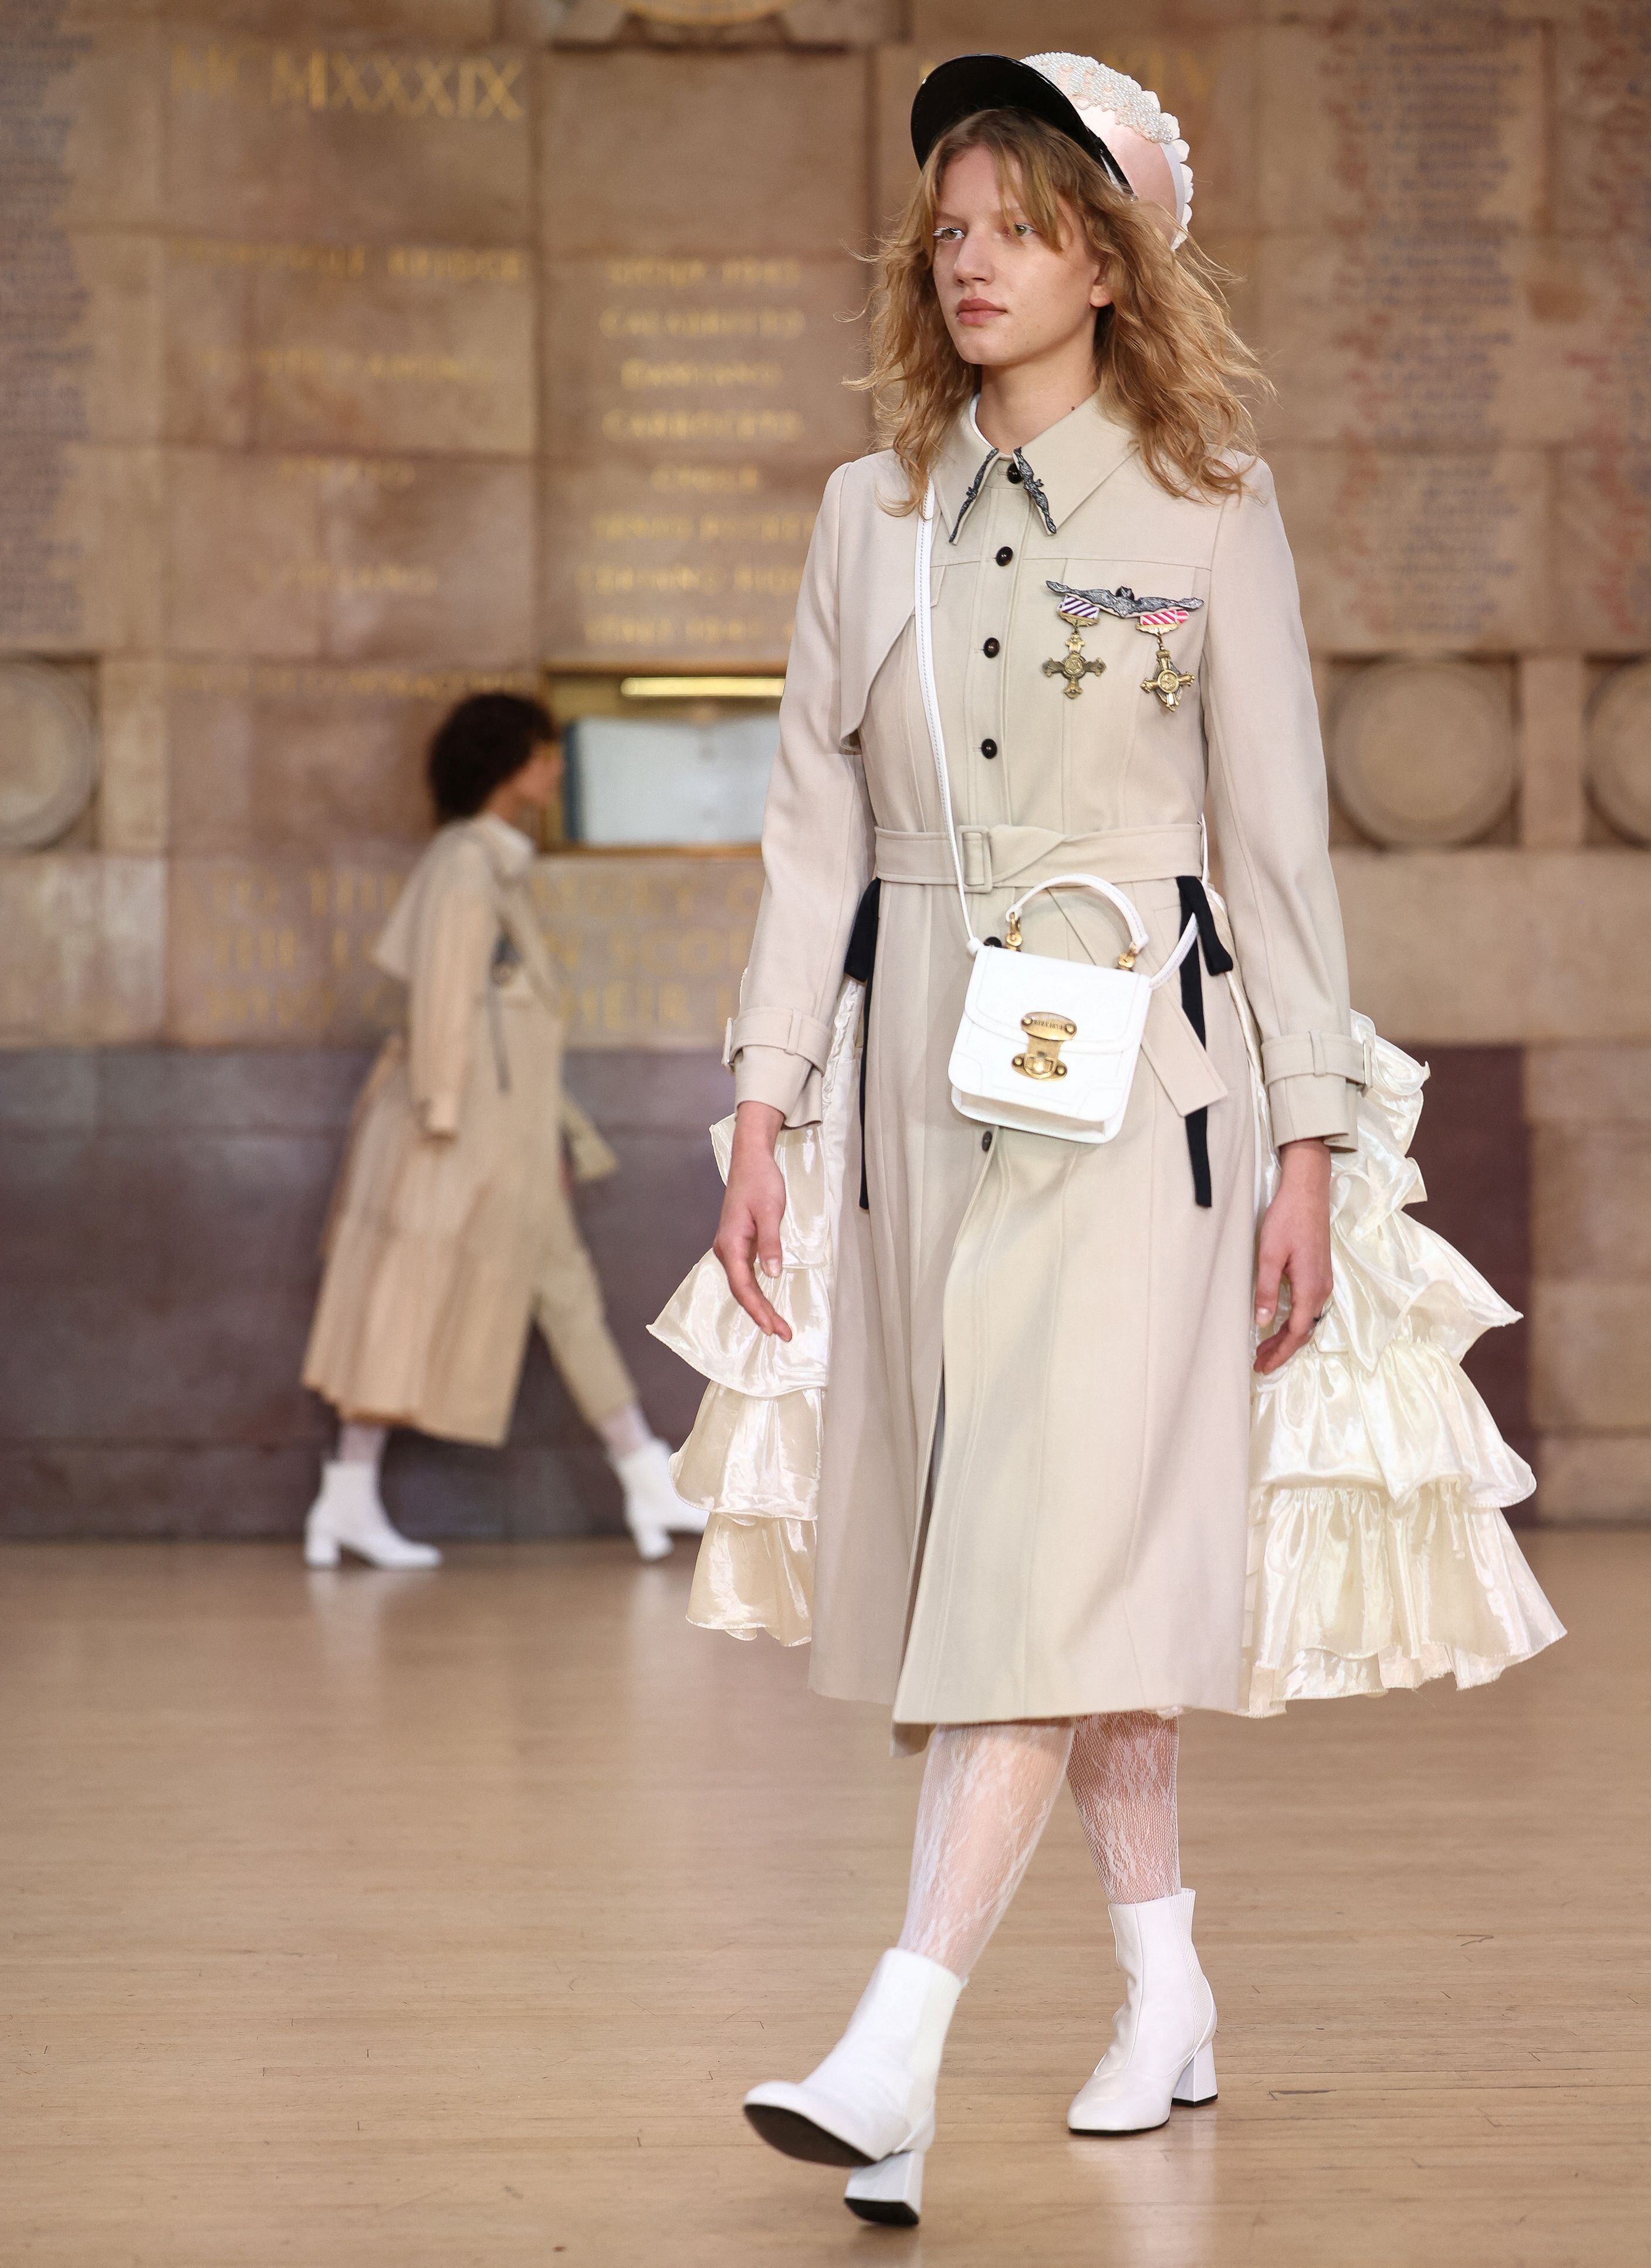 Noor Mohsin is the first Bahraini designer to collaborate with the  prestigious fashion house, Louis Vuitton.